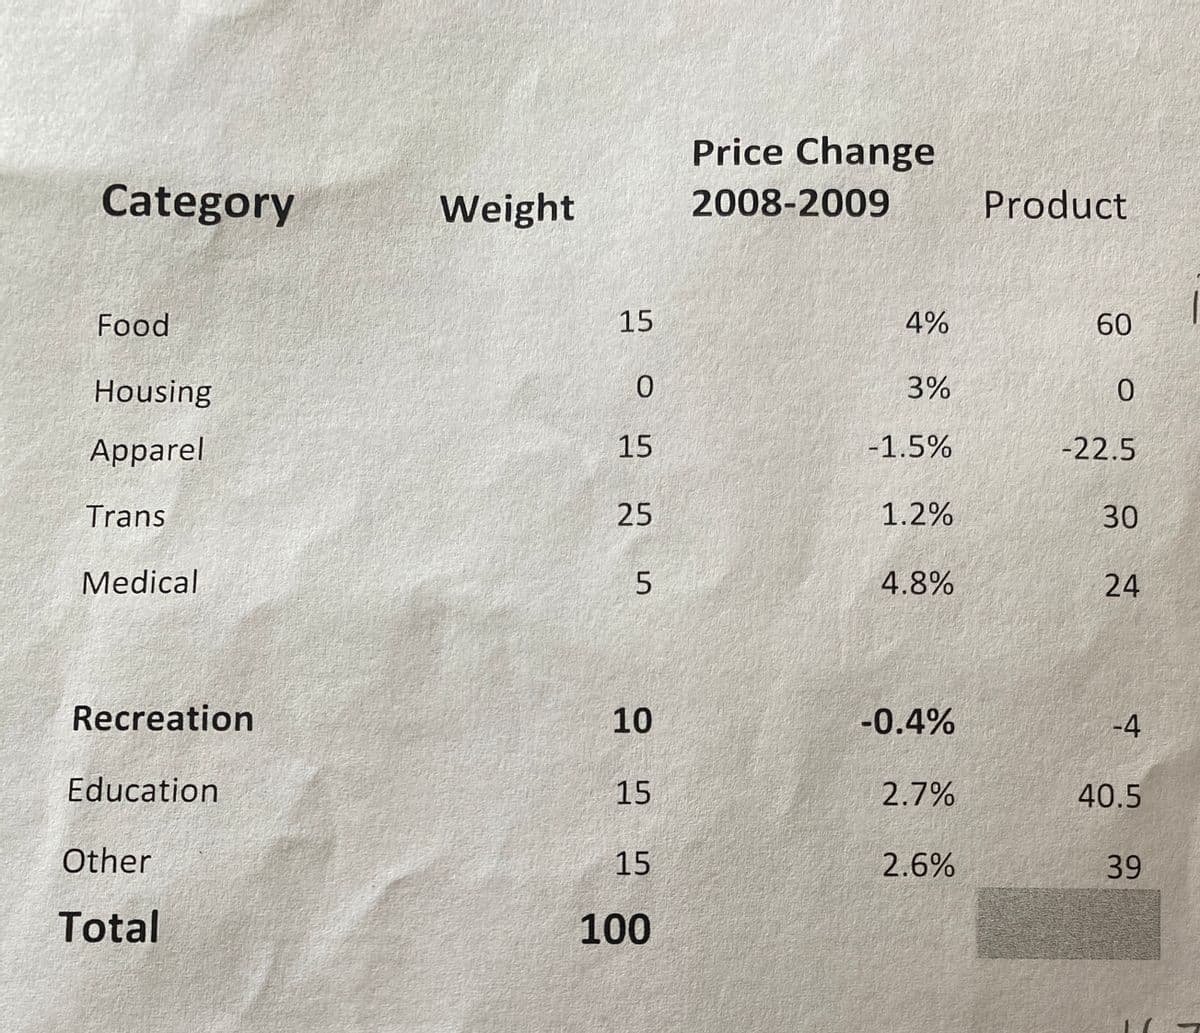 Price Change
Category
Weight
2008-2009
Product
Food
15
4%
60
Housing
3%
0.
Аpparel
15
-1.5%
-22.5
Trans
25
1.2%
30
Medical
4.8%
24
Recreation
10
-0.4%
-4
Education
15
2.7%
40.5
Other
15
2.6%
39
Total
100
